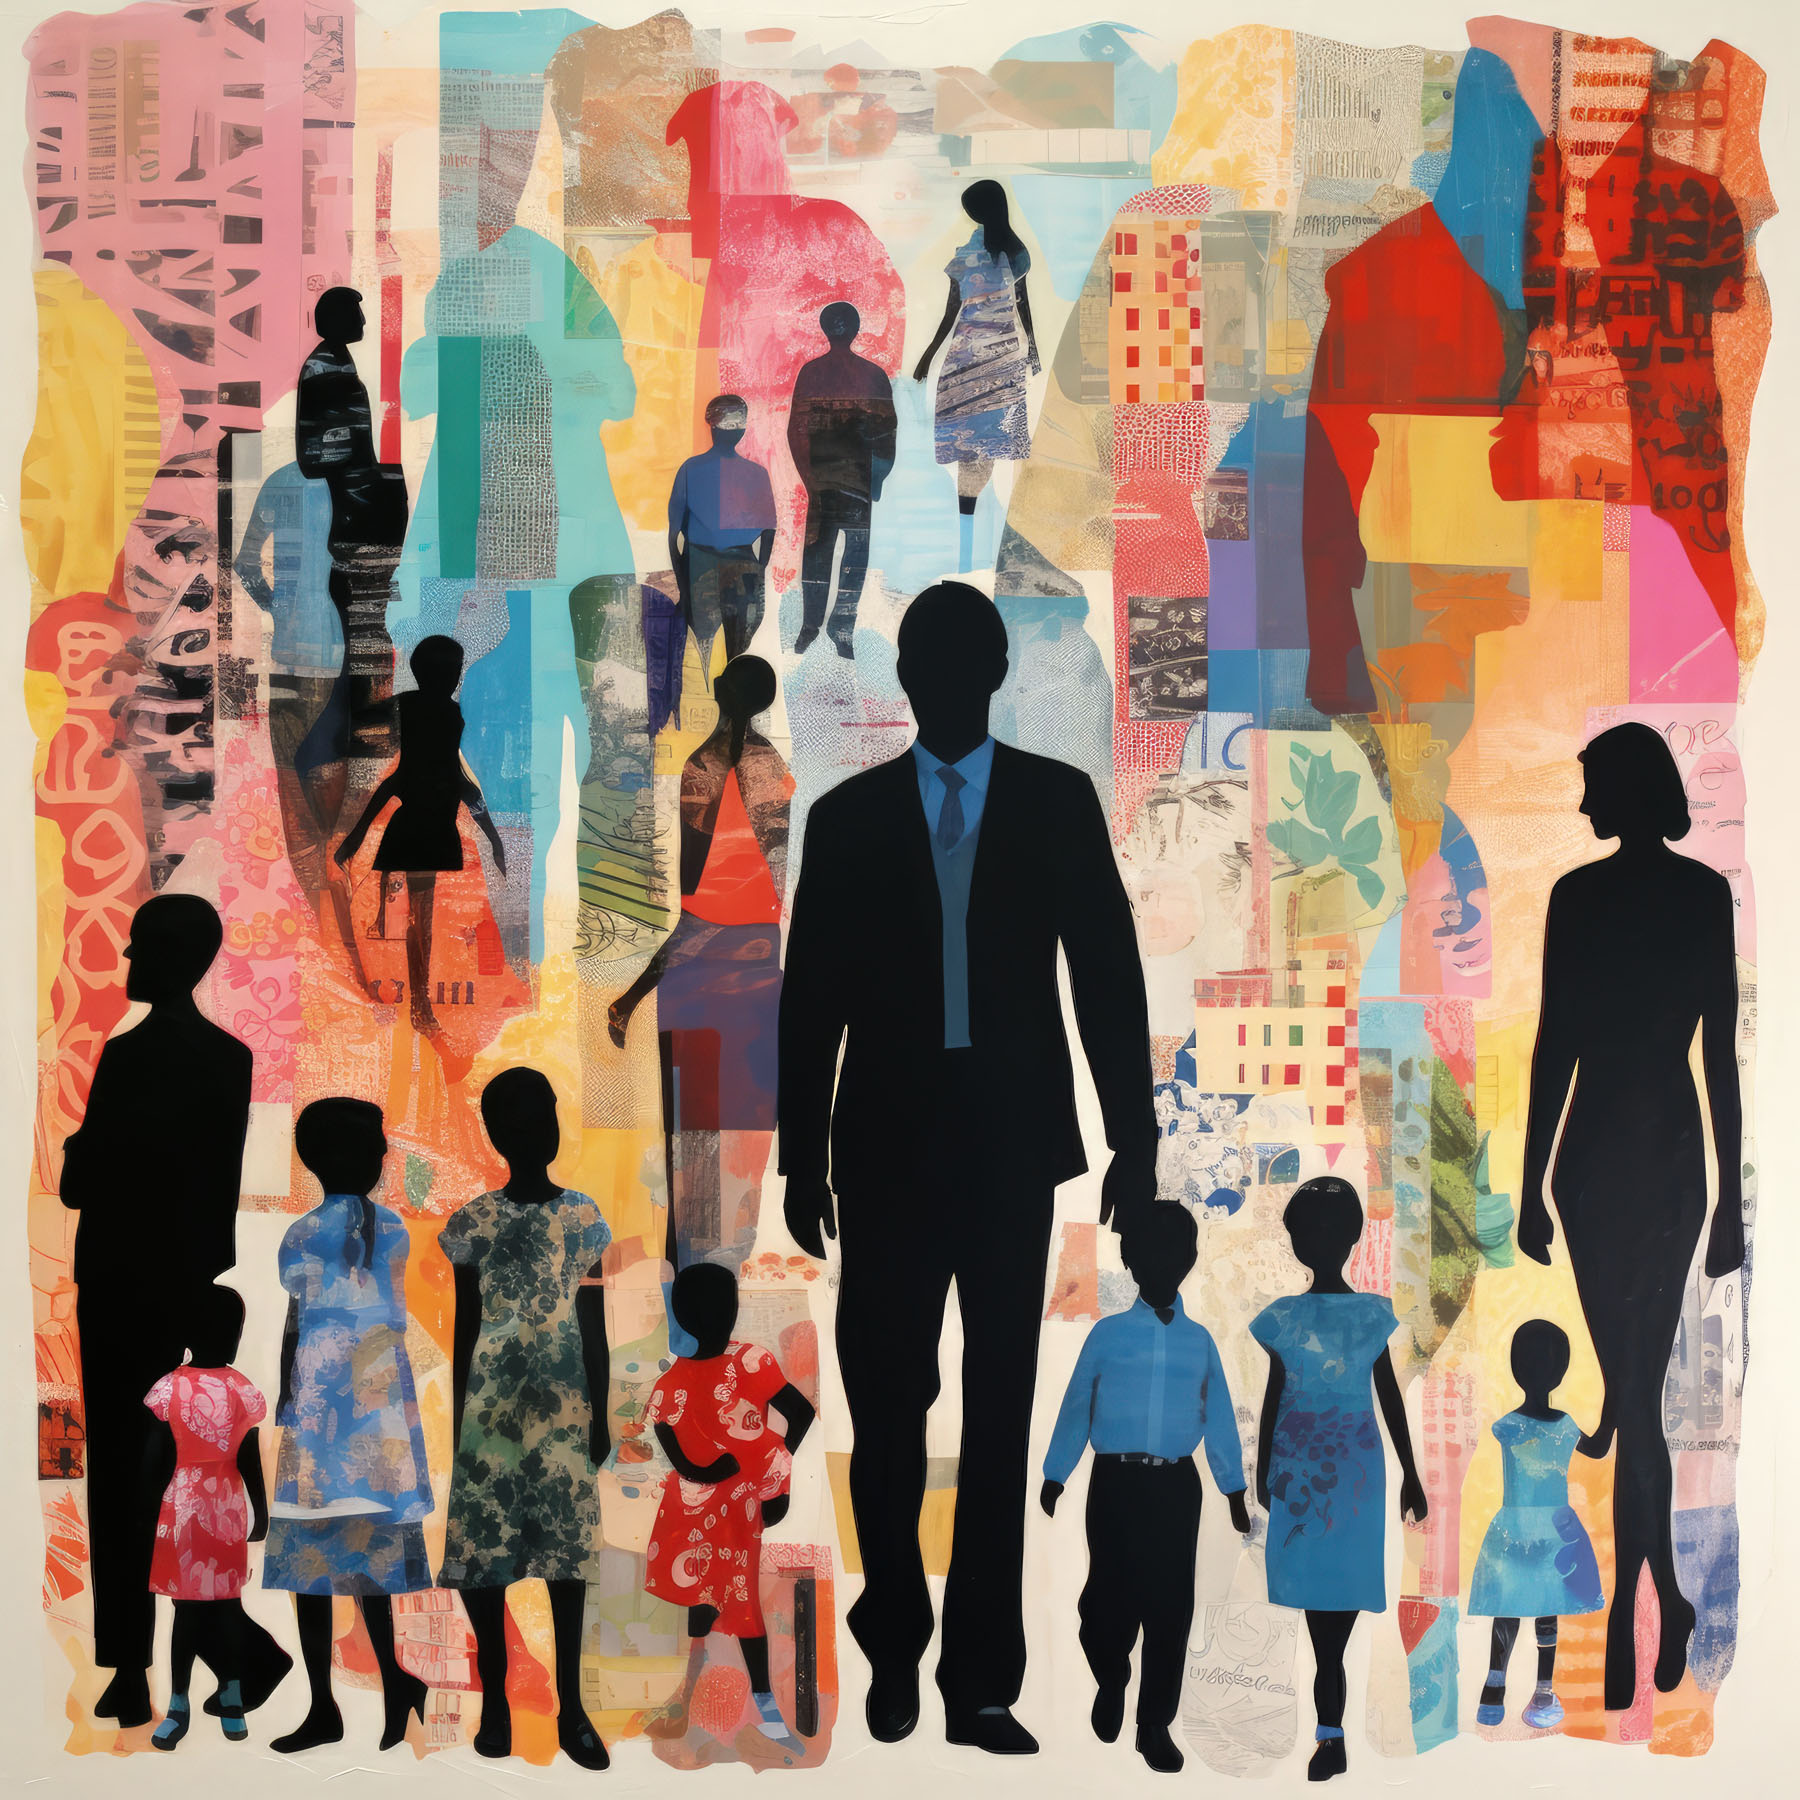 Silhouettes of people are interwoven with bright colors and patterns.